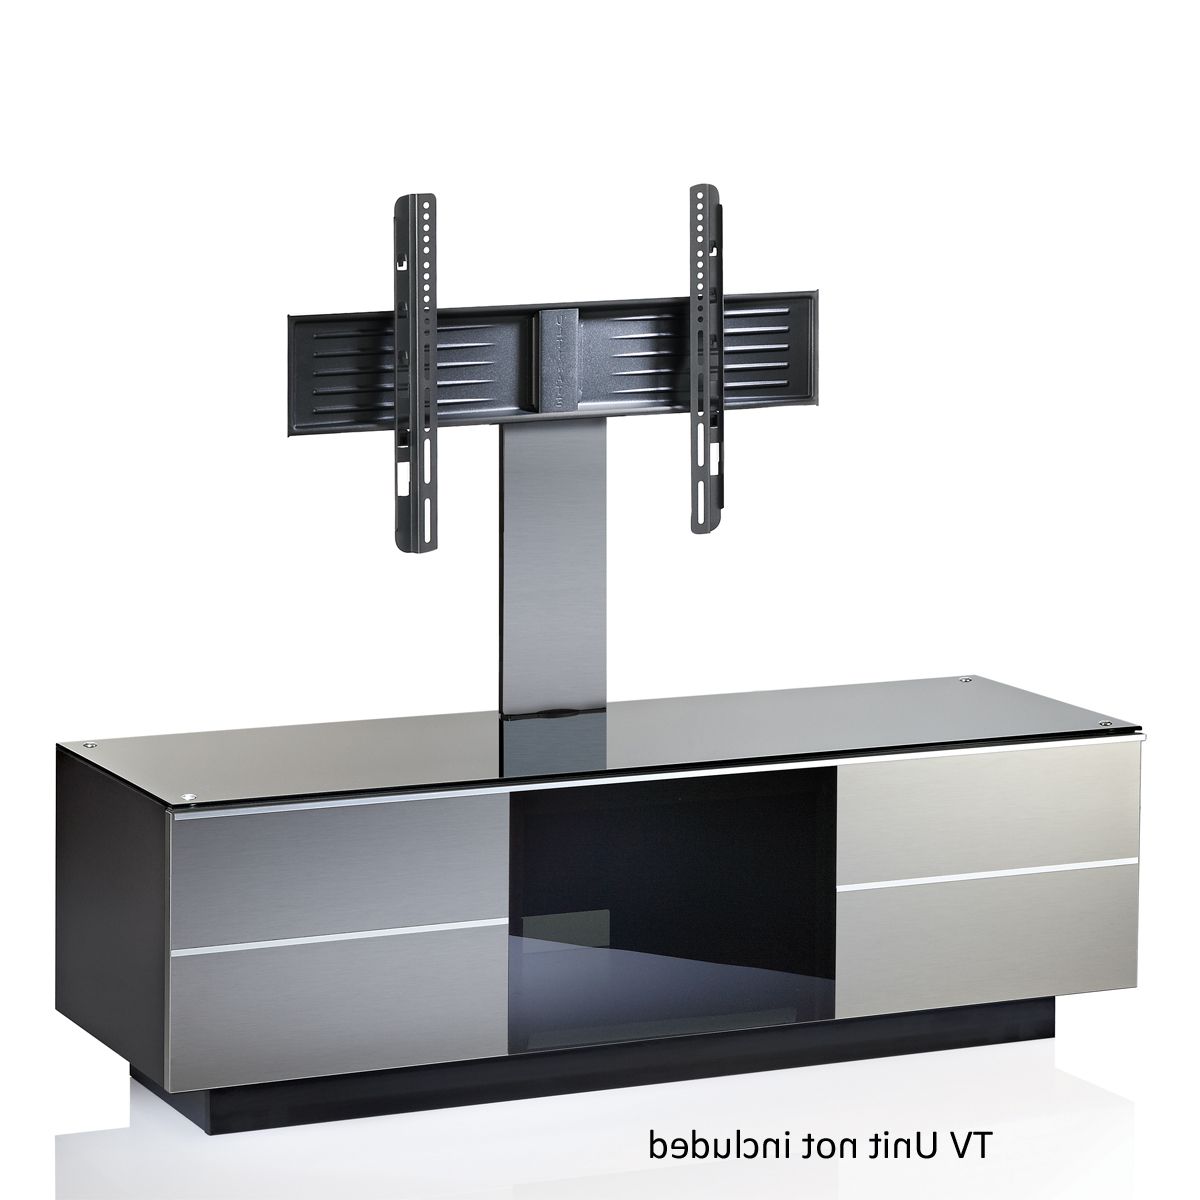 Current Inox G B 80 Inx Cantilever Tv Bracket,ukcf Ultimate,,uk Cf Ultimate Regarding Cheap Cantilever Tv Stands (Photo 19 of 20)